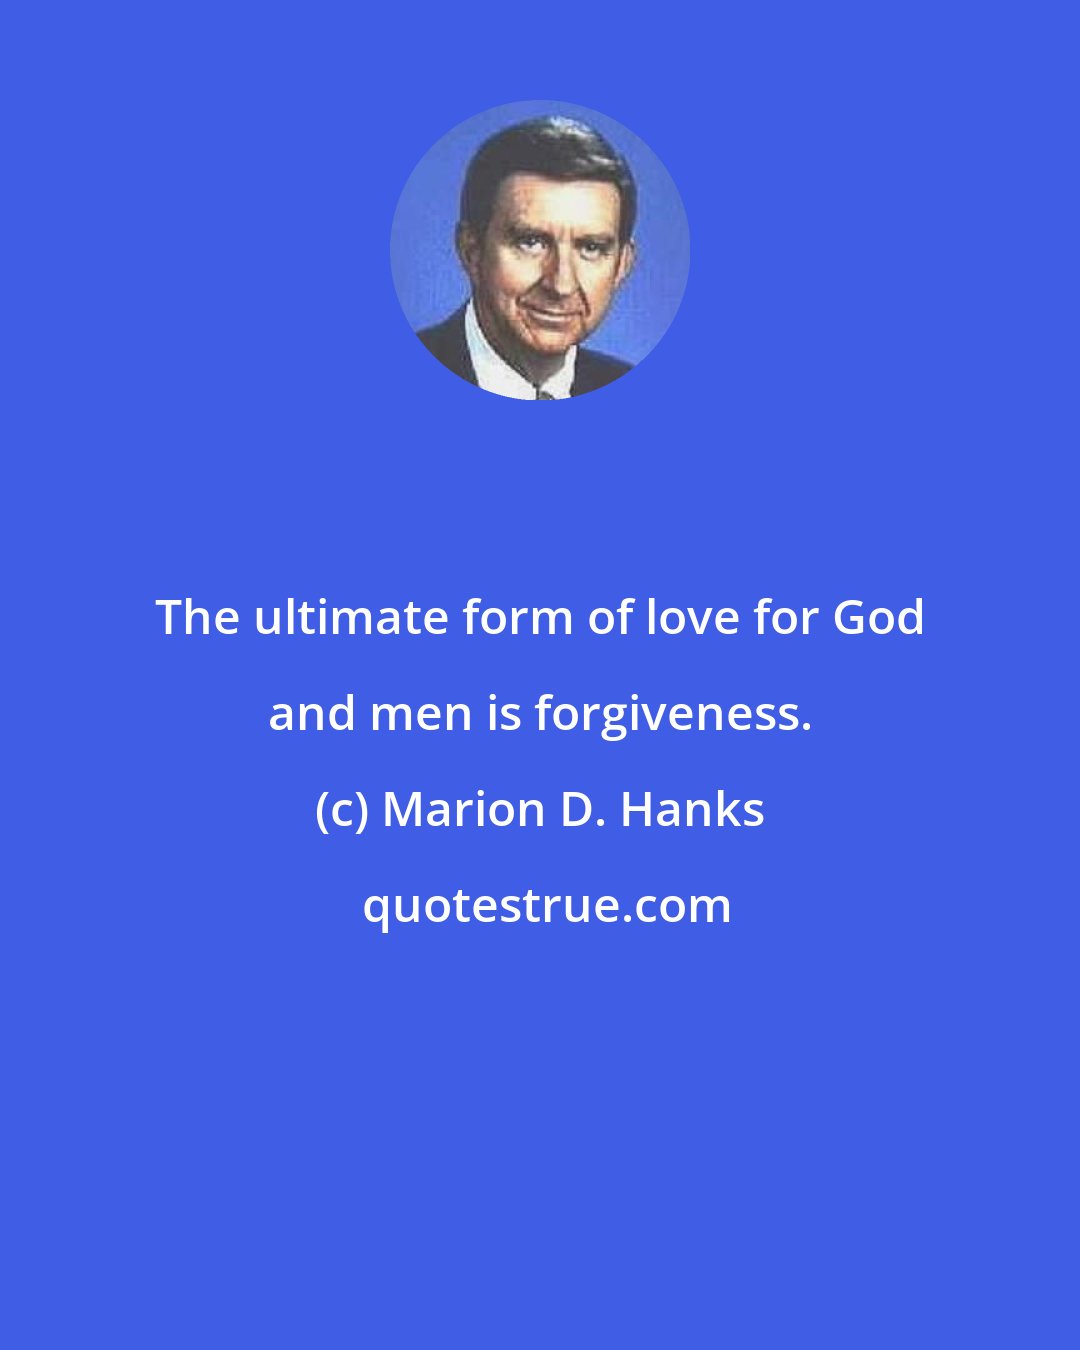 Marion D. Hanks: The ultimate form of love for God and men is forgiveness.